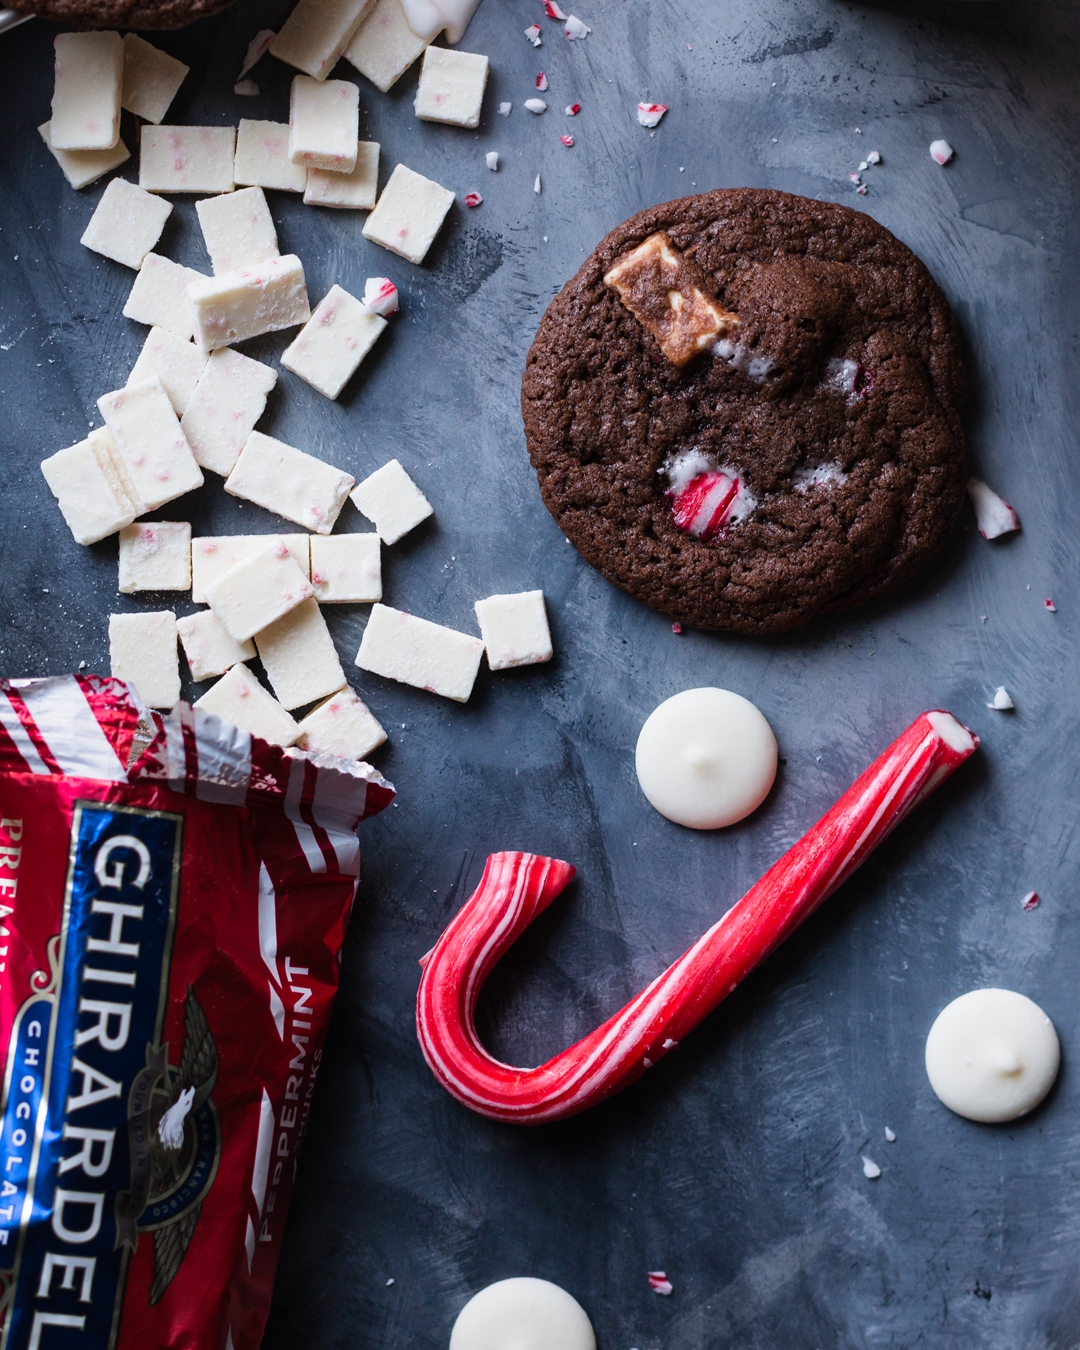 Overhead shot of cookie surrounded by a candy cane, peppermint chips, and white chocolate wafers.